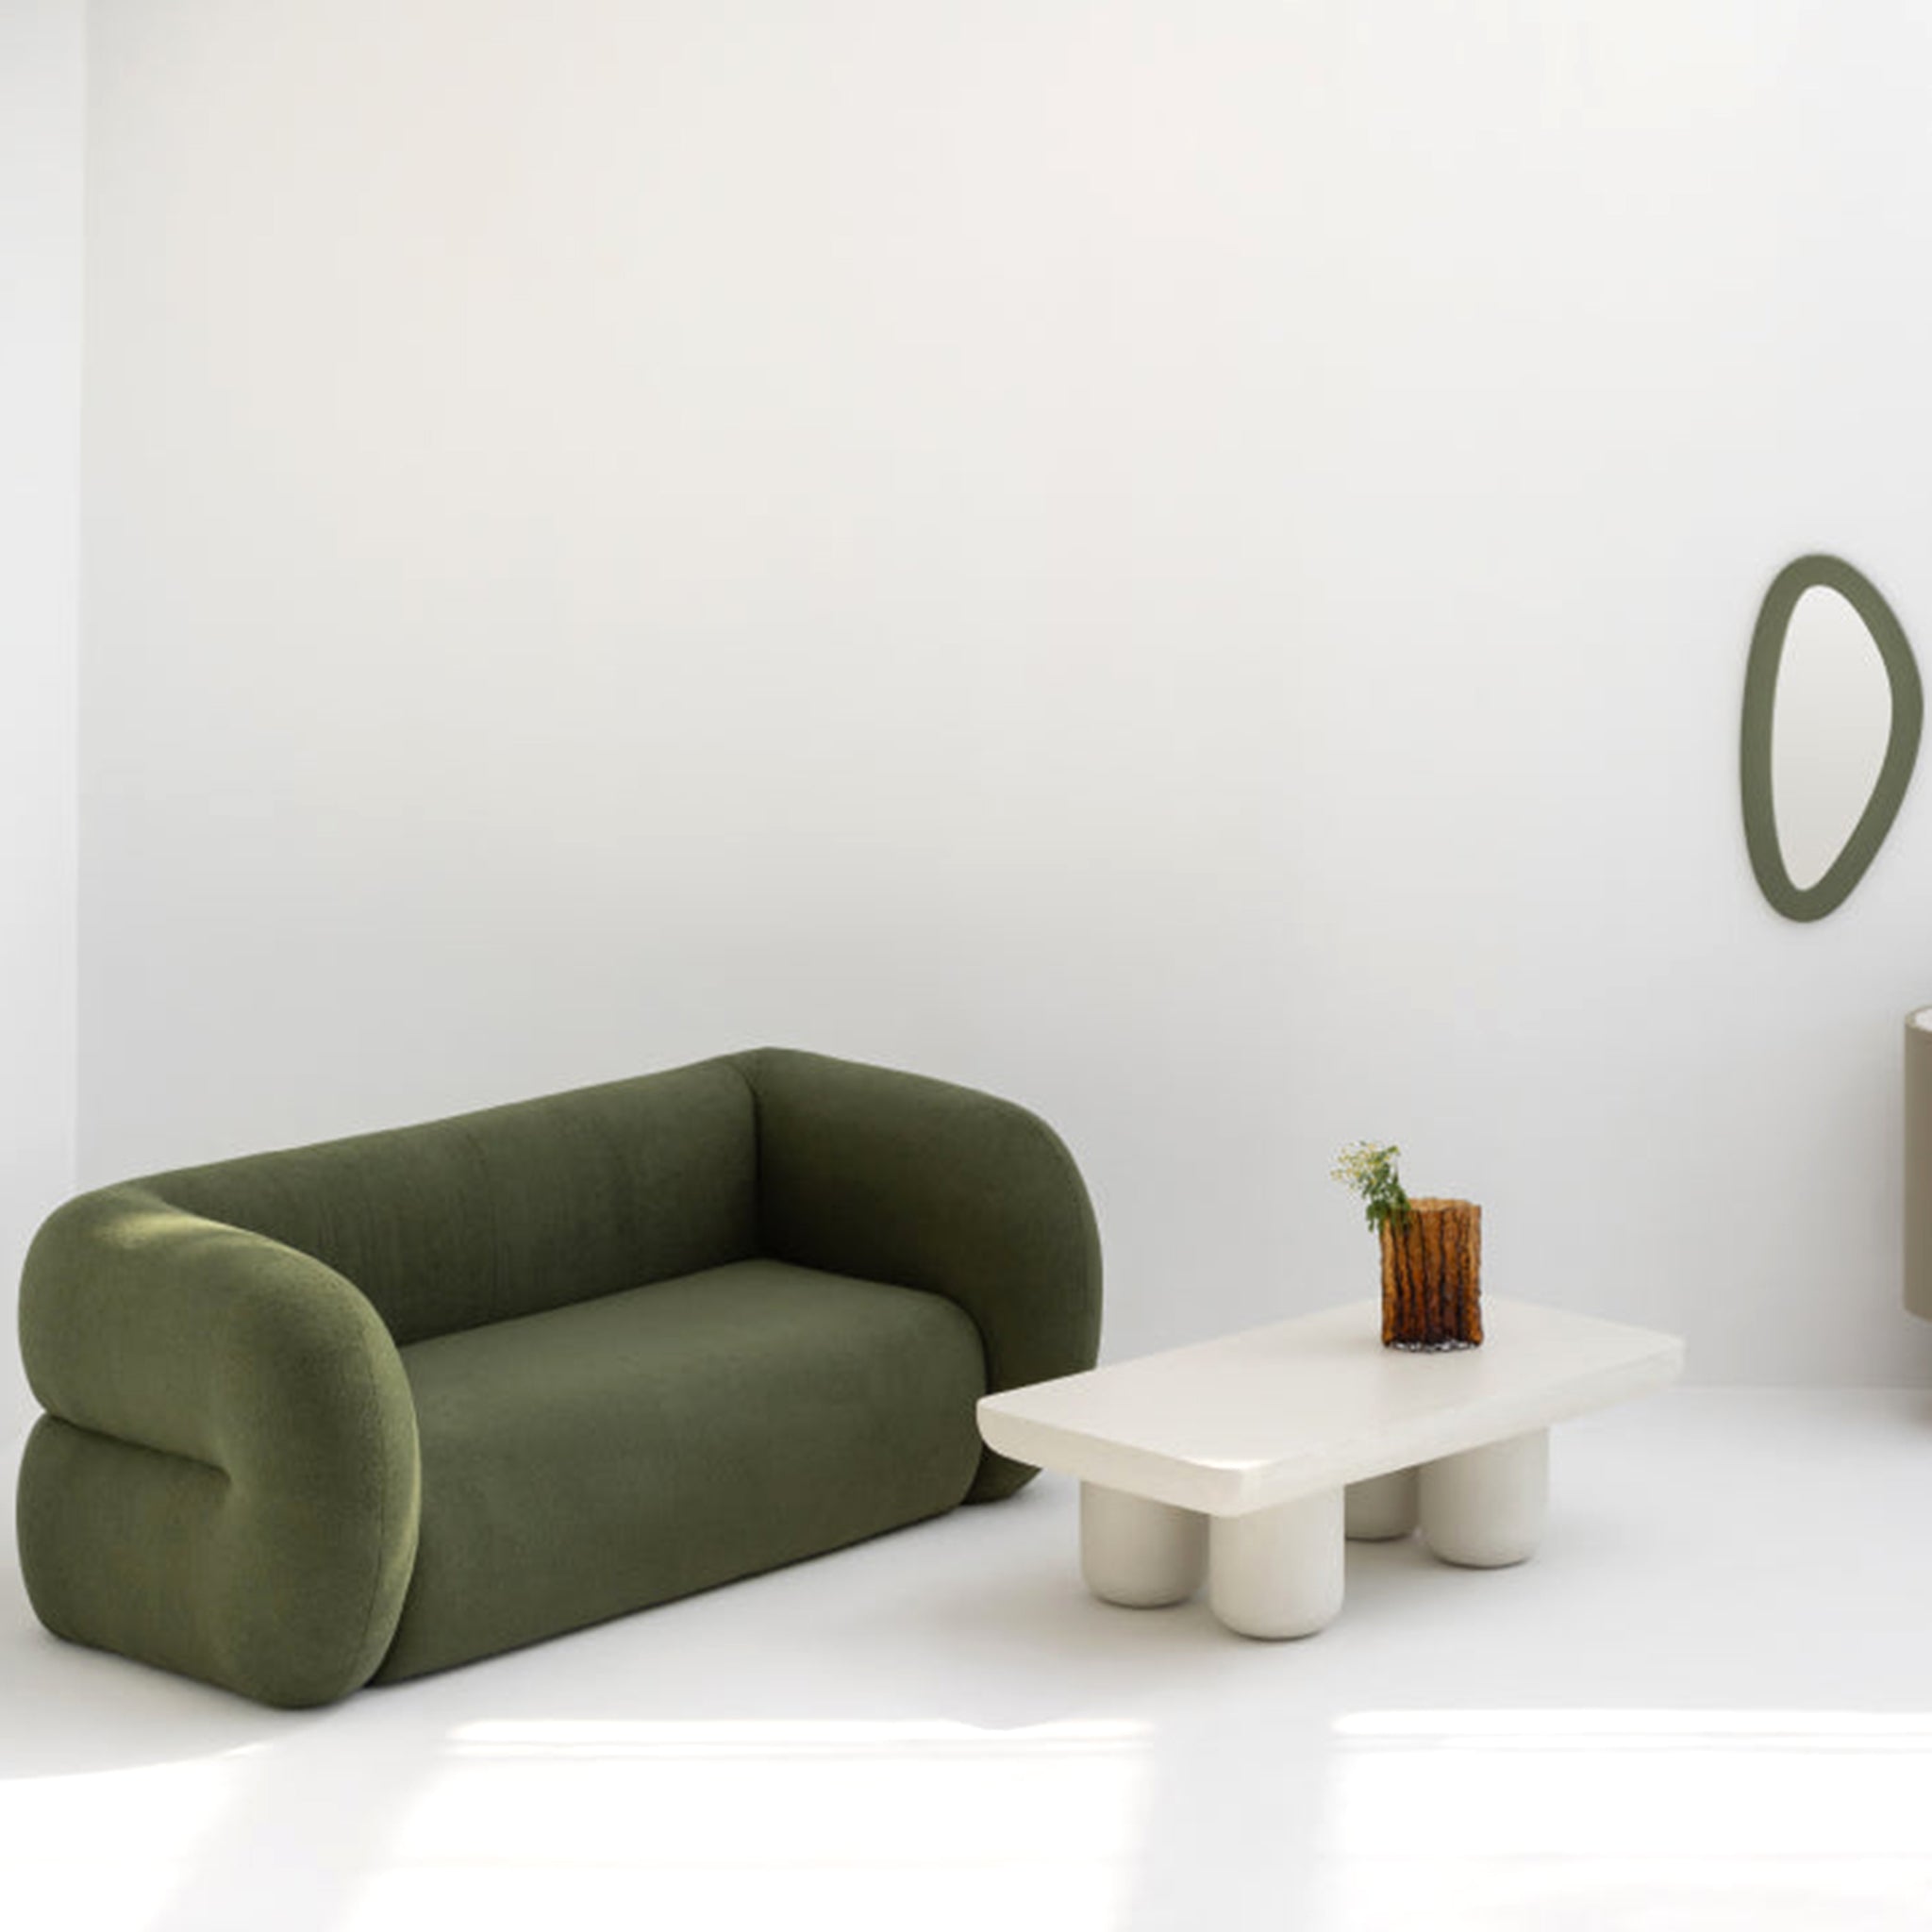 Modern minimalist living room featuring a stylish green sofa and a unique white coffee table with rounded legs, complemented by a contemporary wall mirror and a small decorative vase.